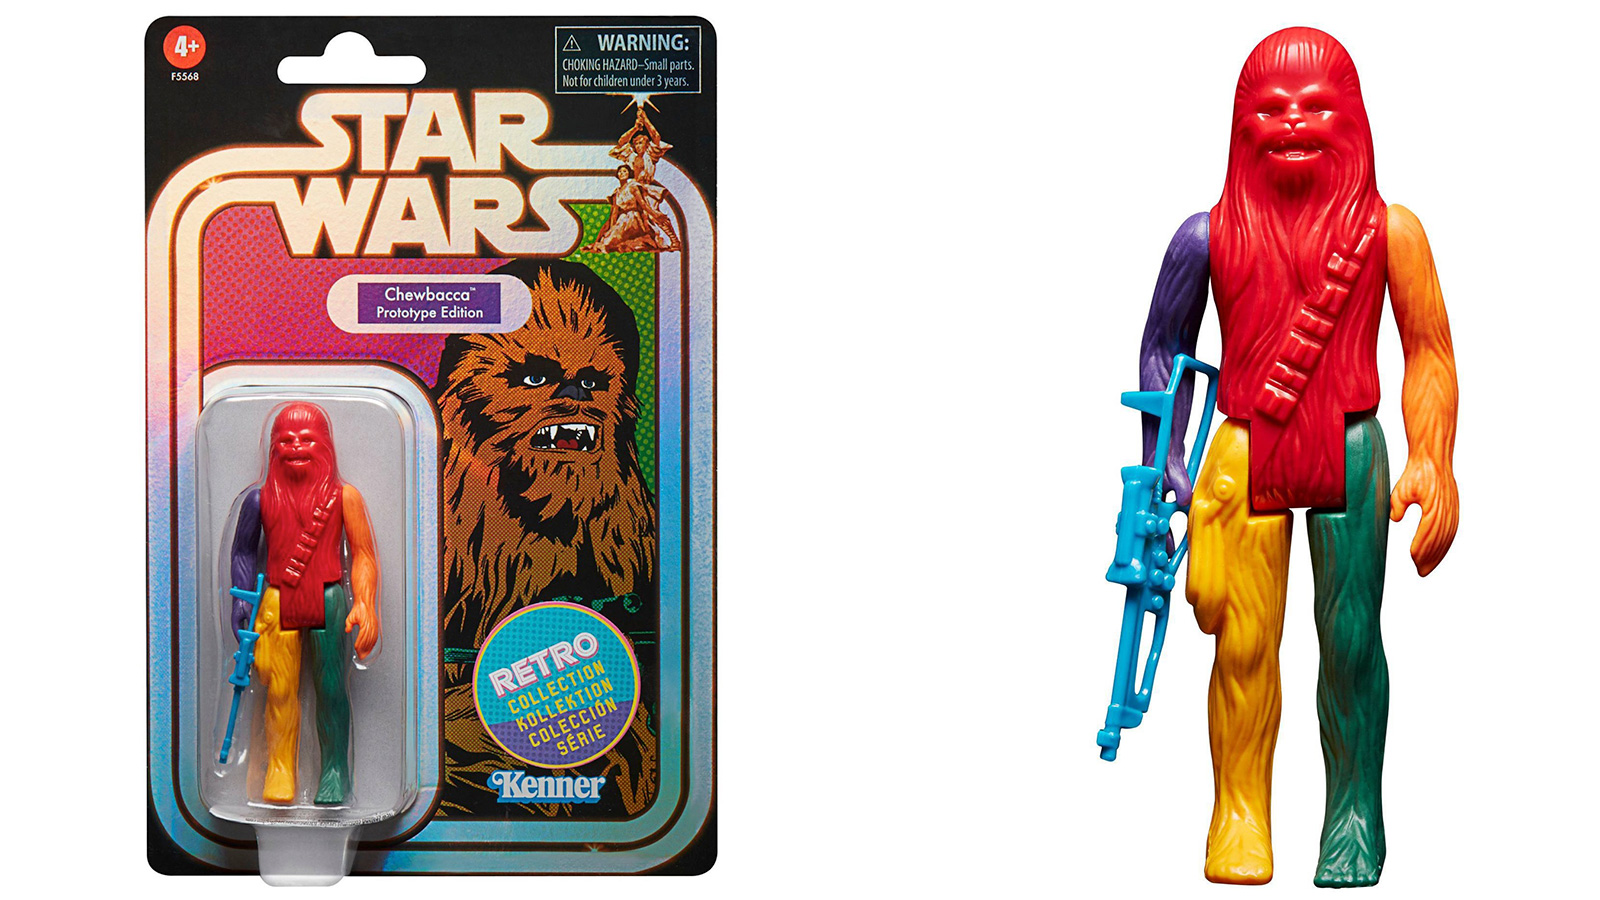 In Stock At Target - Exclusive Retro Collection Chewbacca Prototype Edition